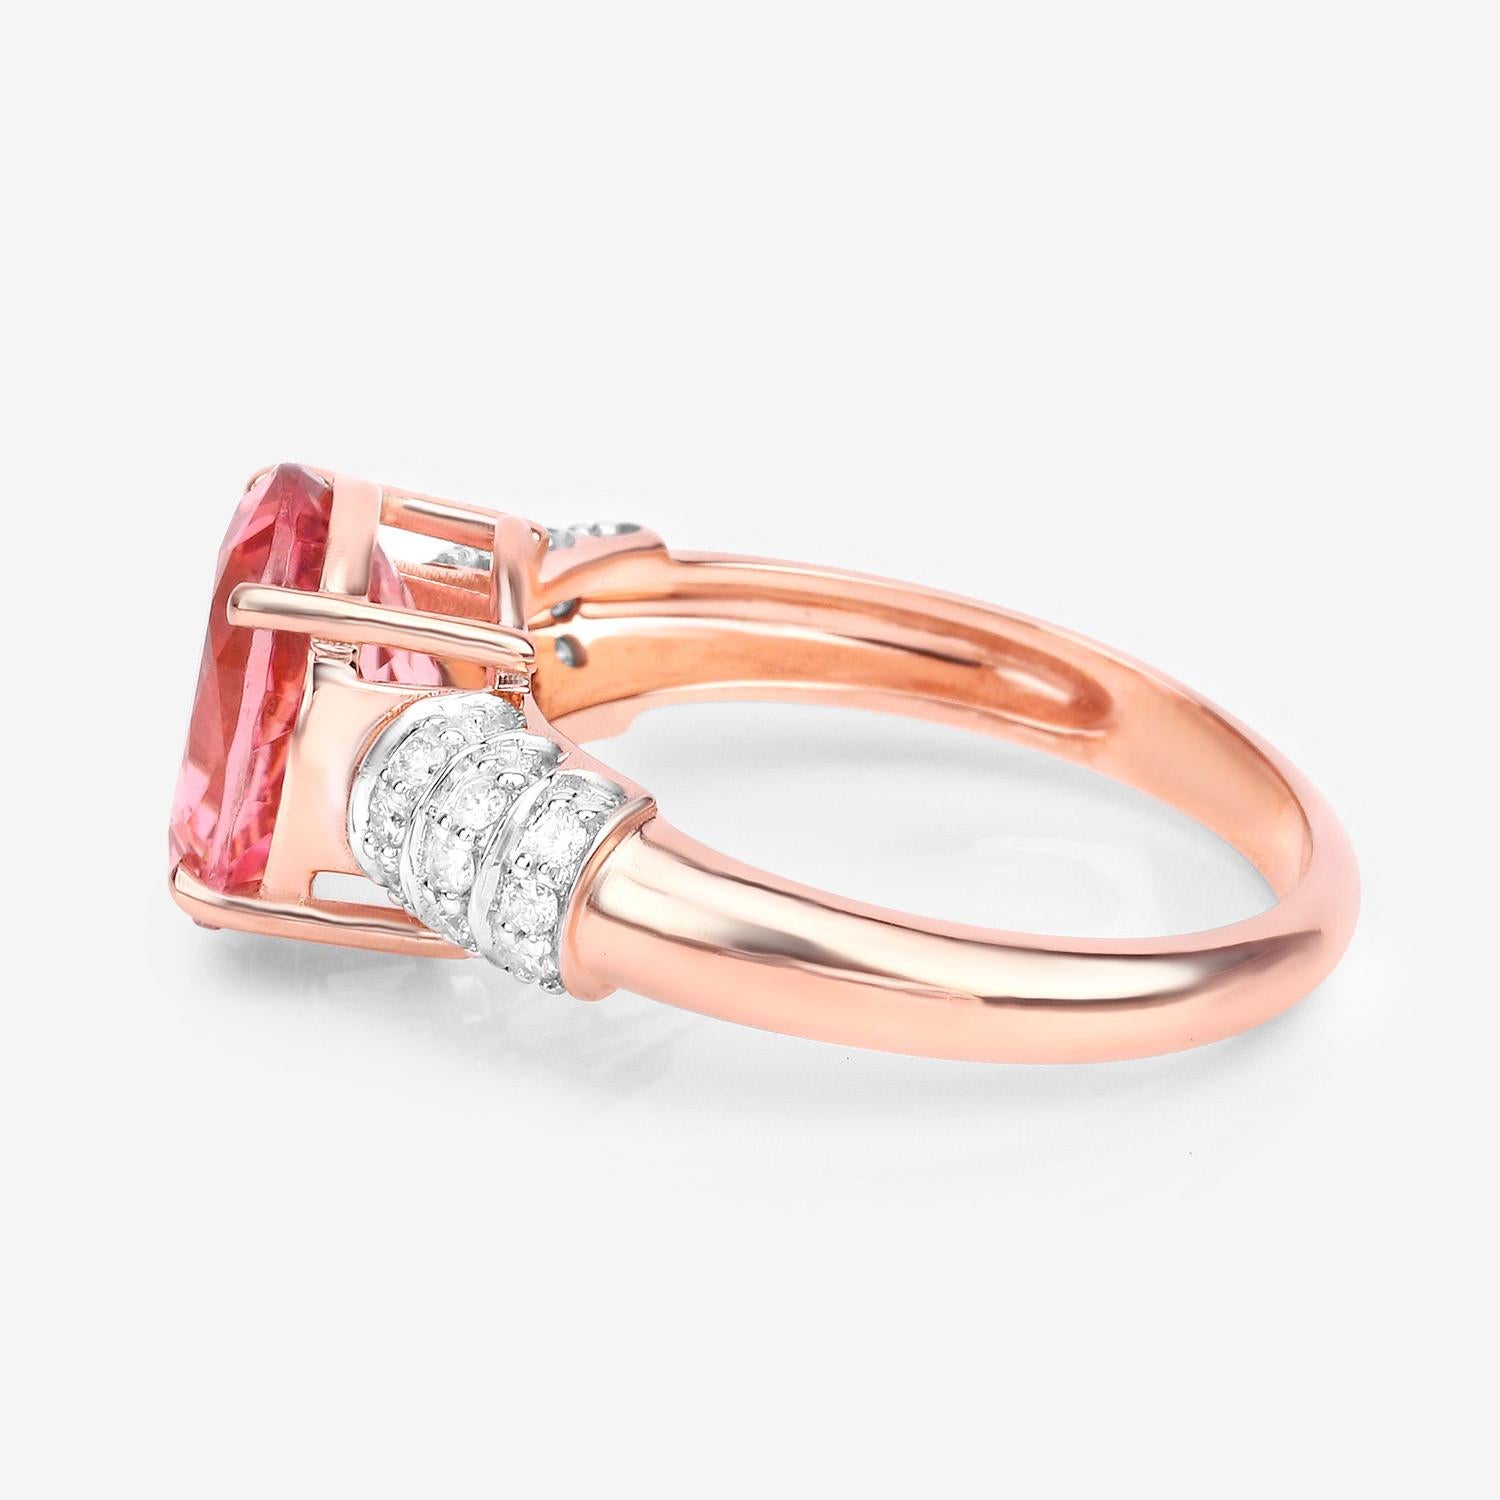 Women's Natural Pink Tourmaline Cocktail Ring Diamond Setting 3.10 Carats 14K Rose Gold For Sale